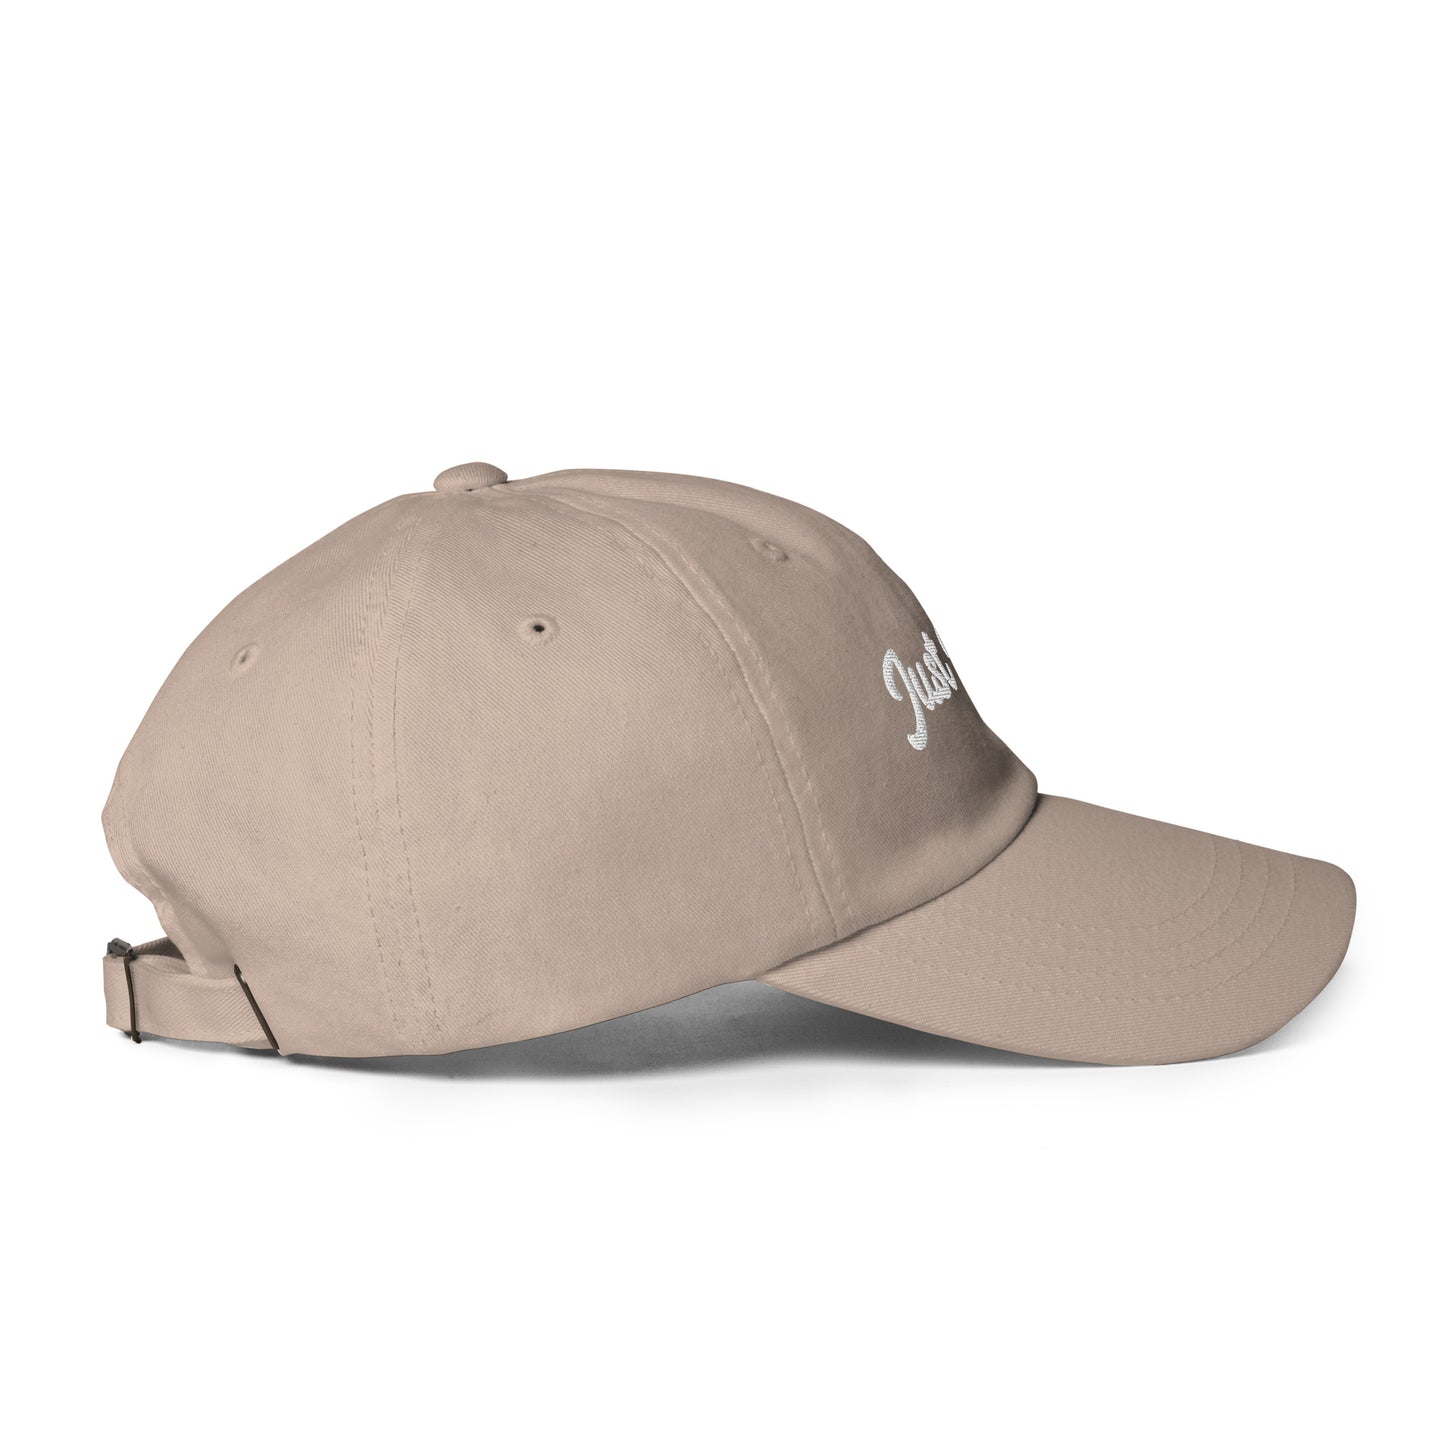 Just Vibe Dad hat